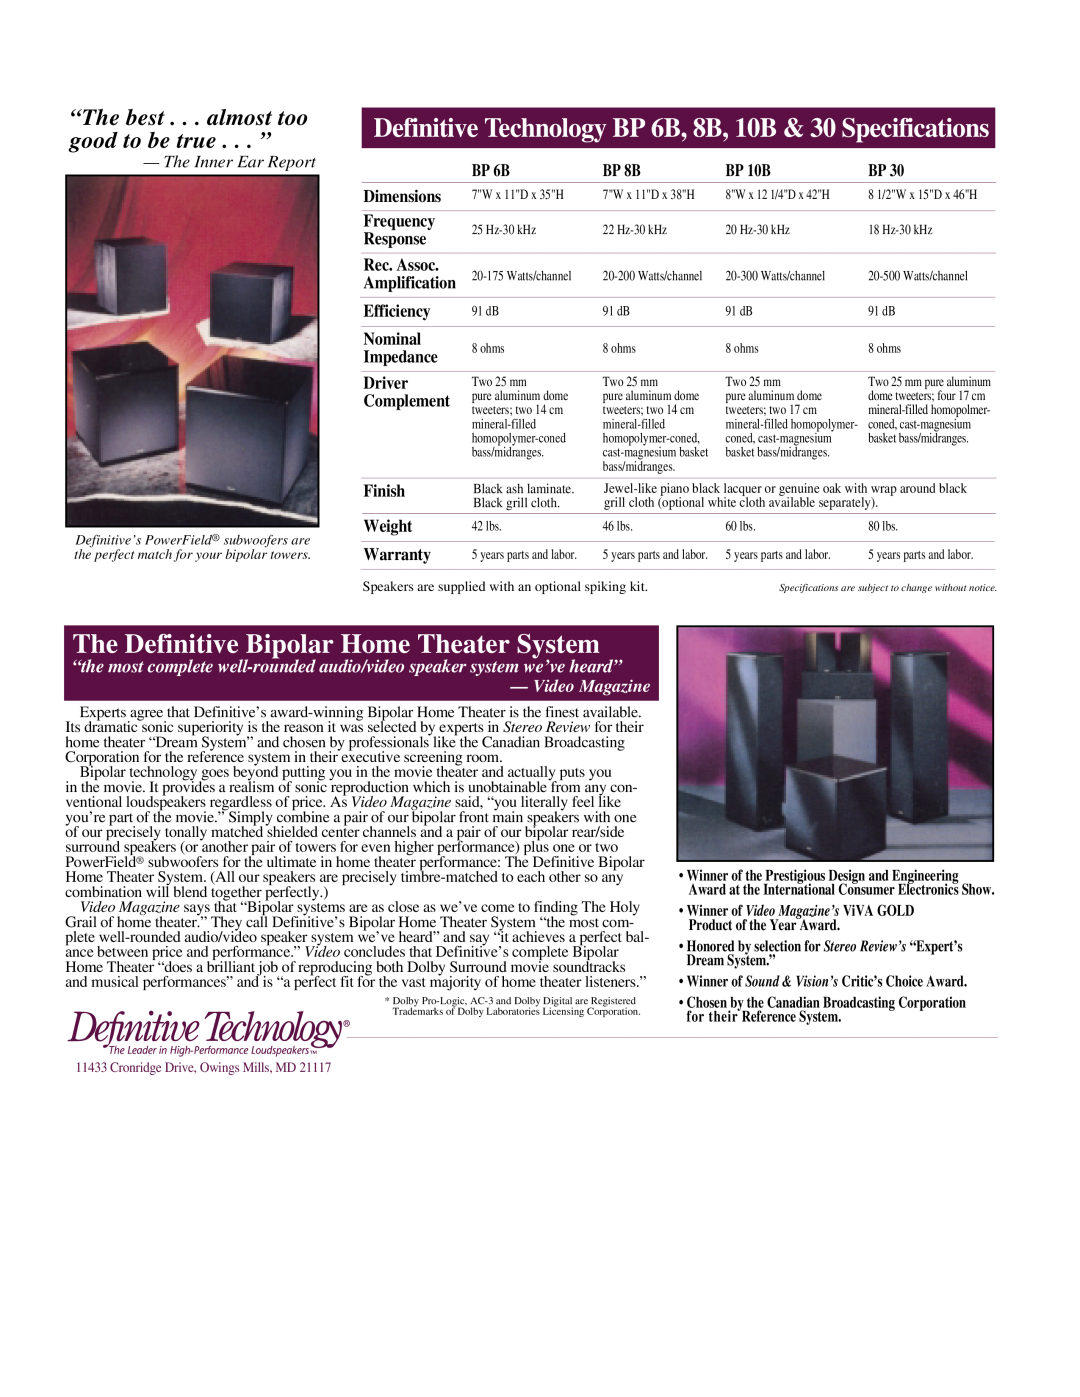 Definitive Technology BP 6B, 30, 8B, 10B The Definitive Bipolar Home Theater System, The Inner Ear Report, Video Magazine 